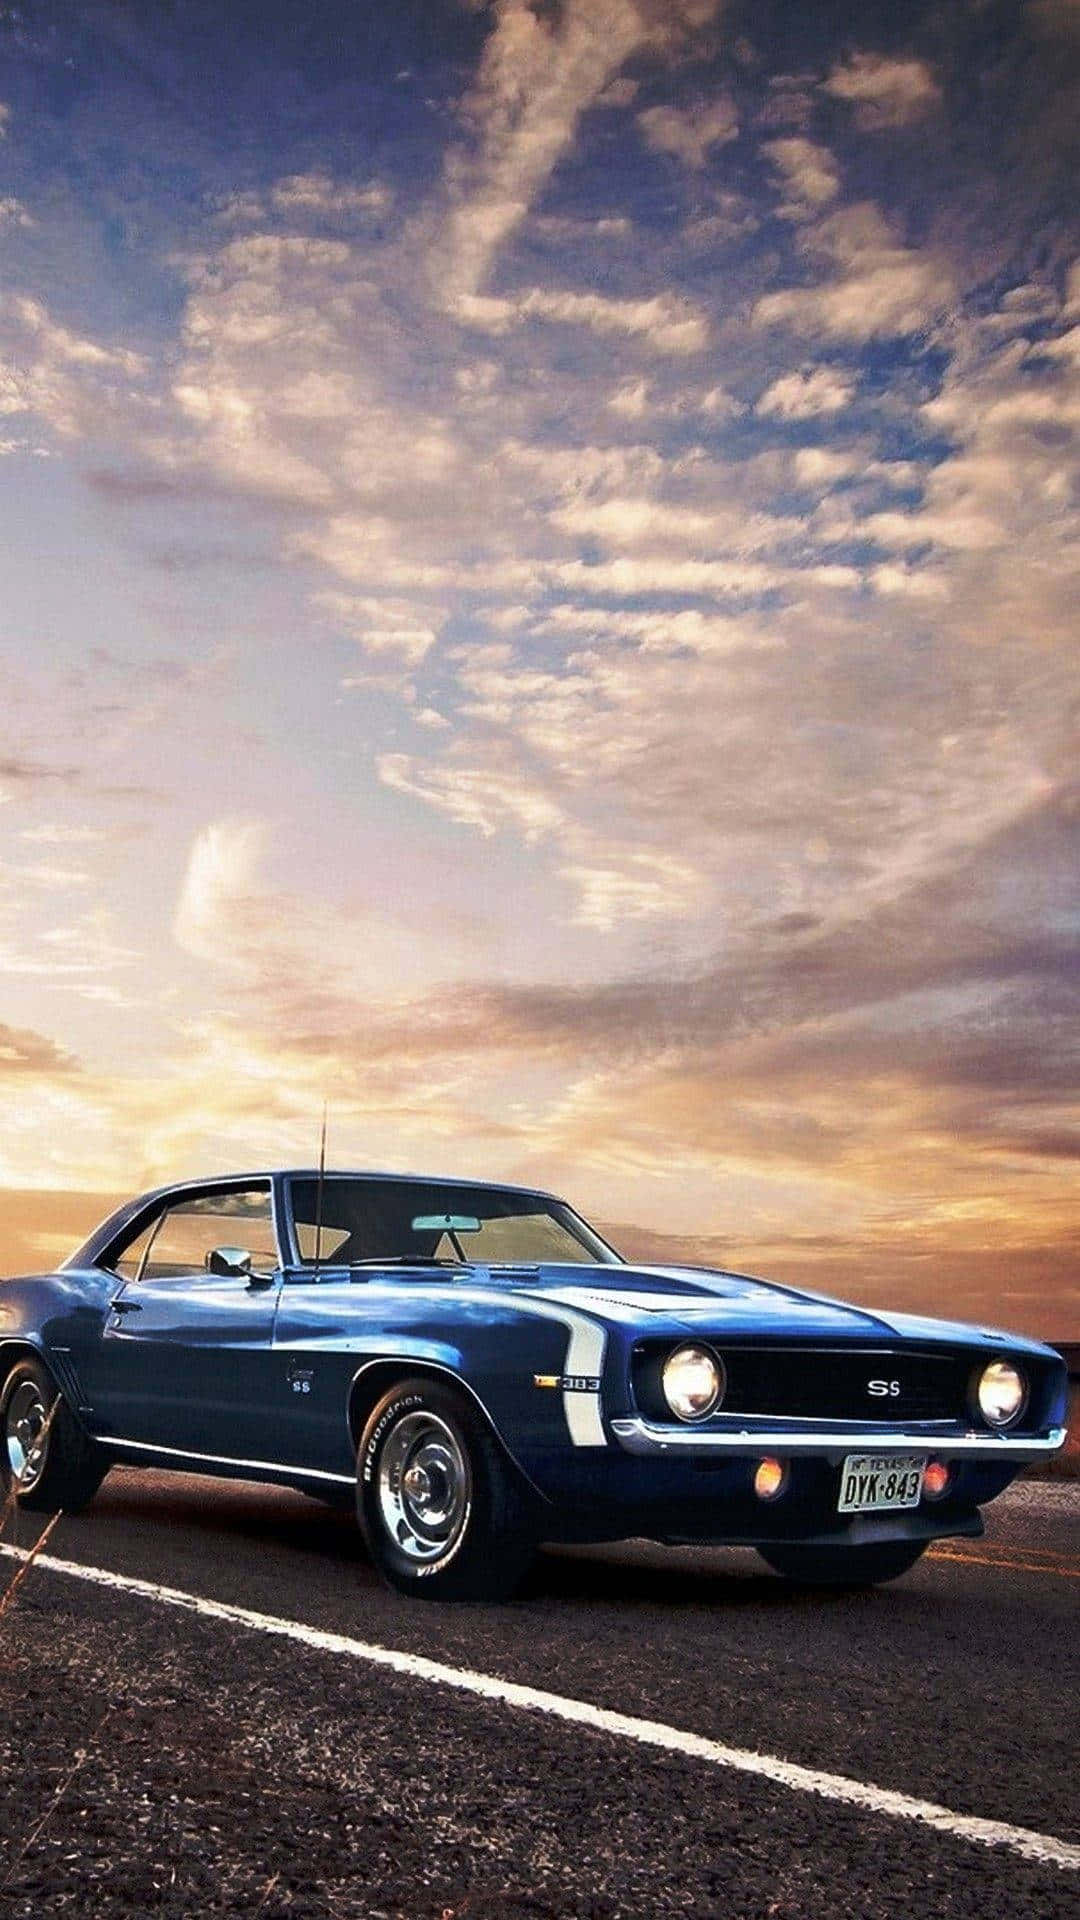 Vintage Car With Clouds Iphone Wallpaper